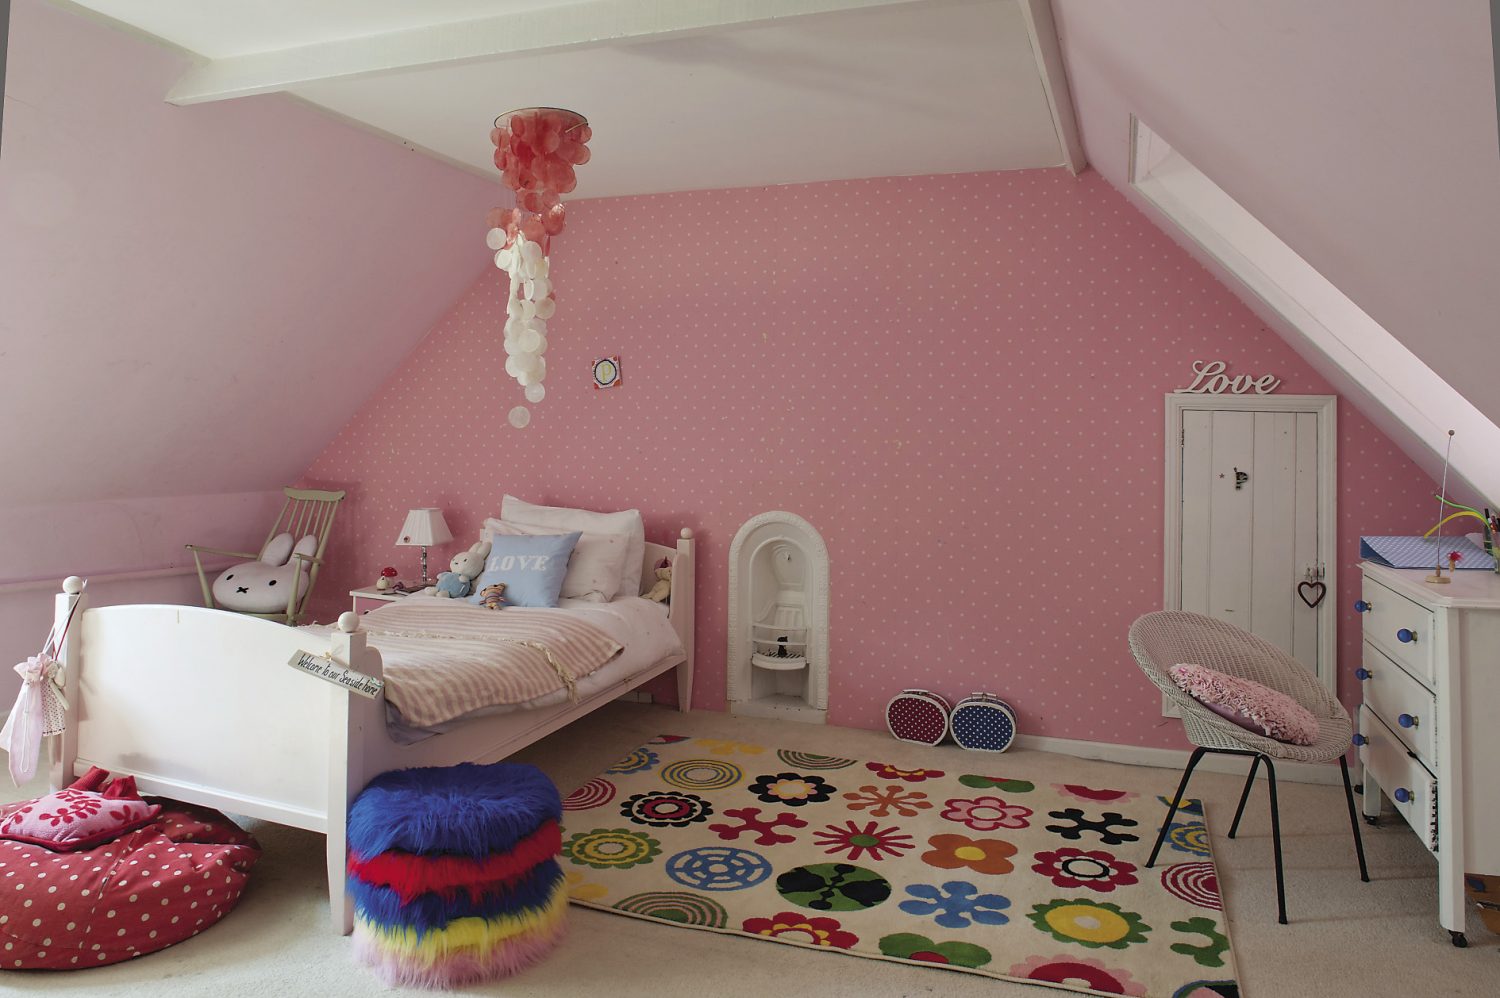 The older girls’ rooms are up another flight of stairs in the eaves of the house and decorated in cheerful shades of pink, blue or orange